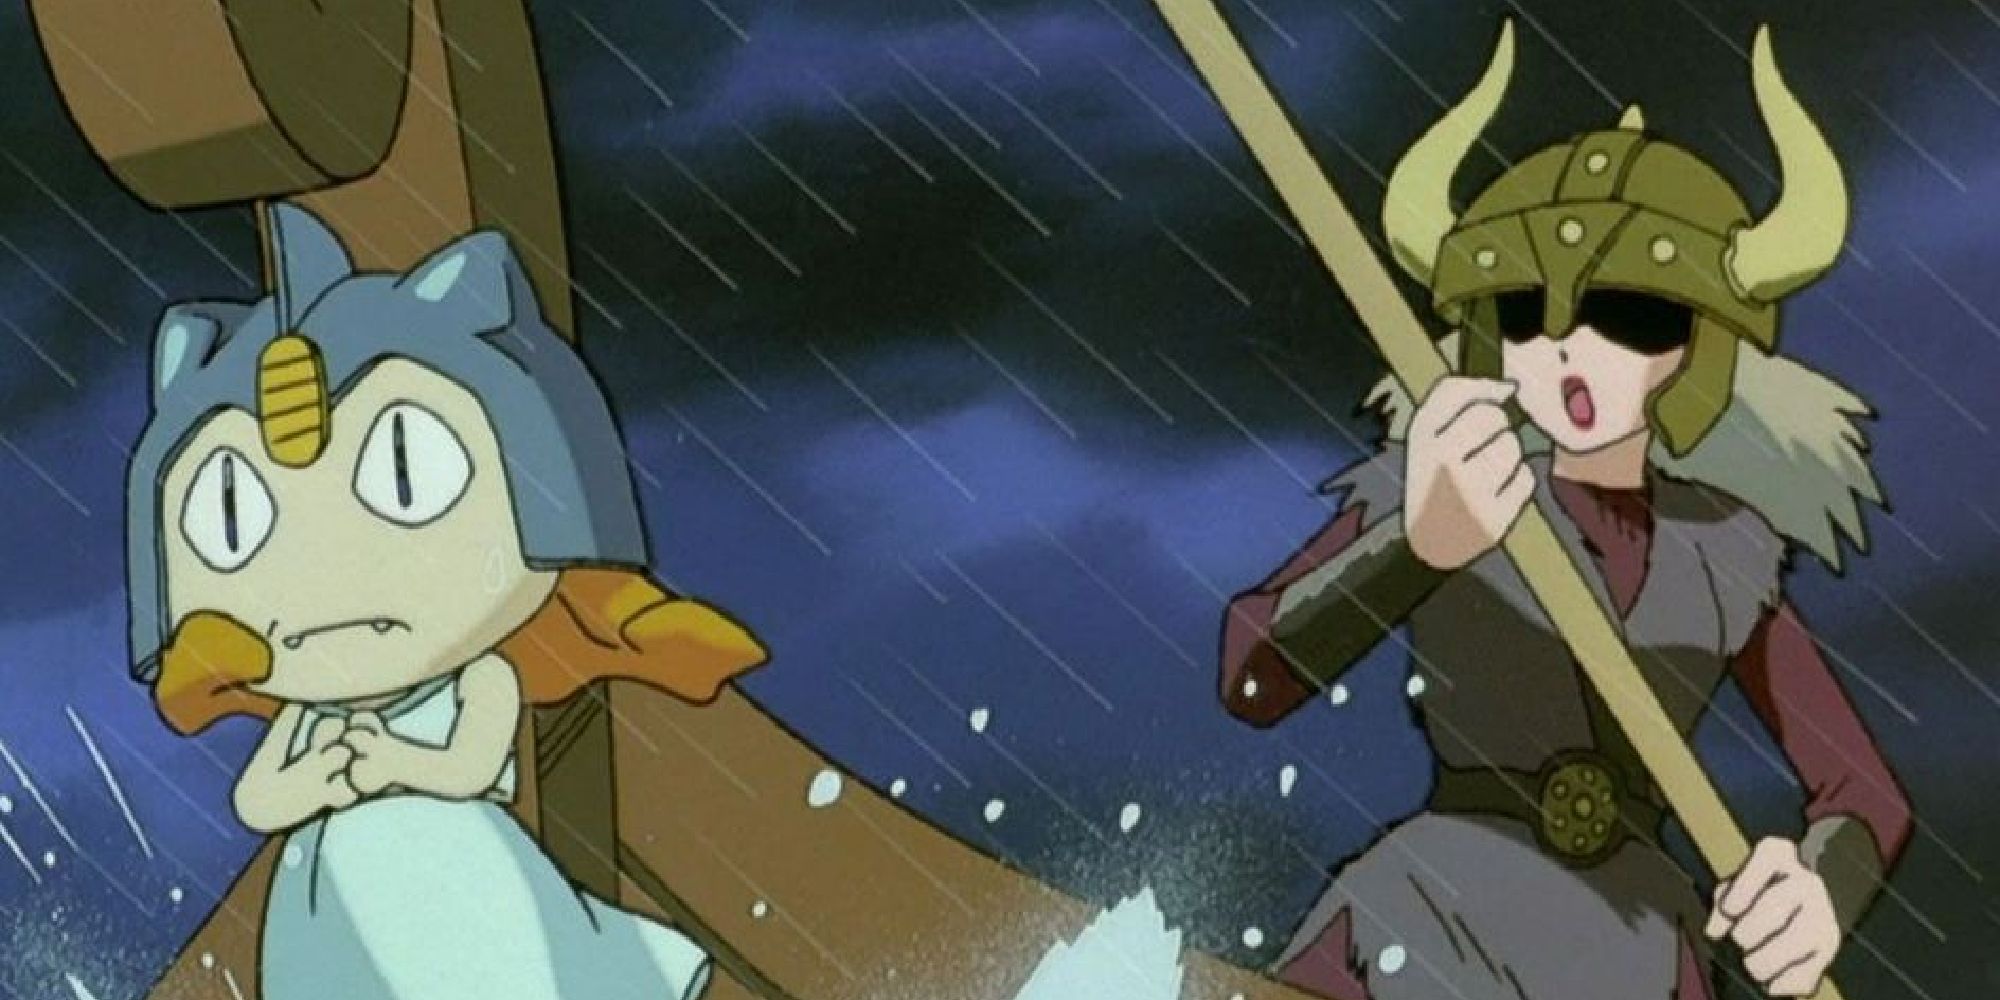 Jesse and Meowth in Viking outfits sailing a ship in the rain from the Pokemon anime